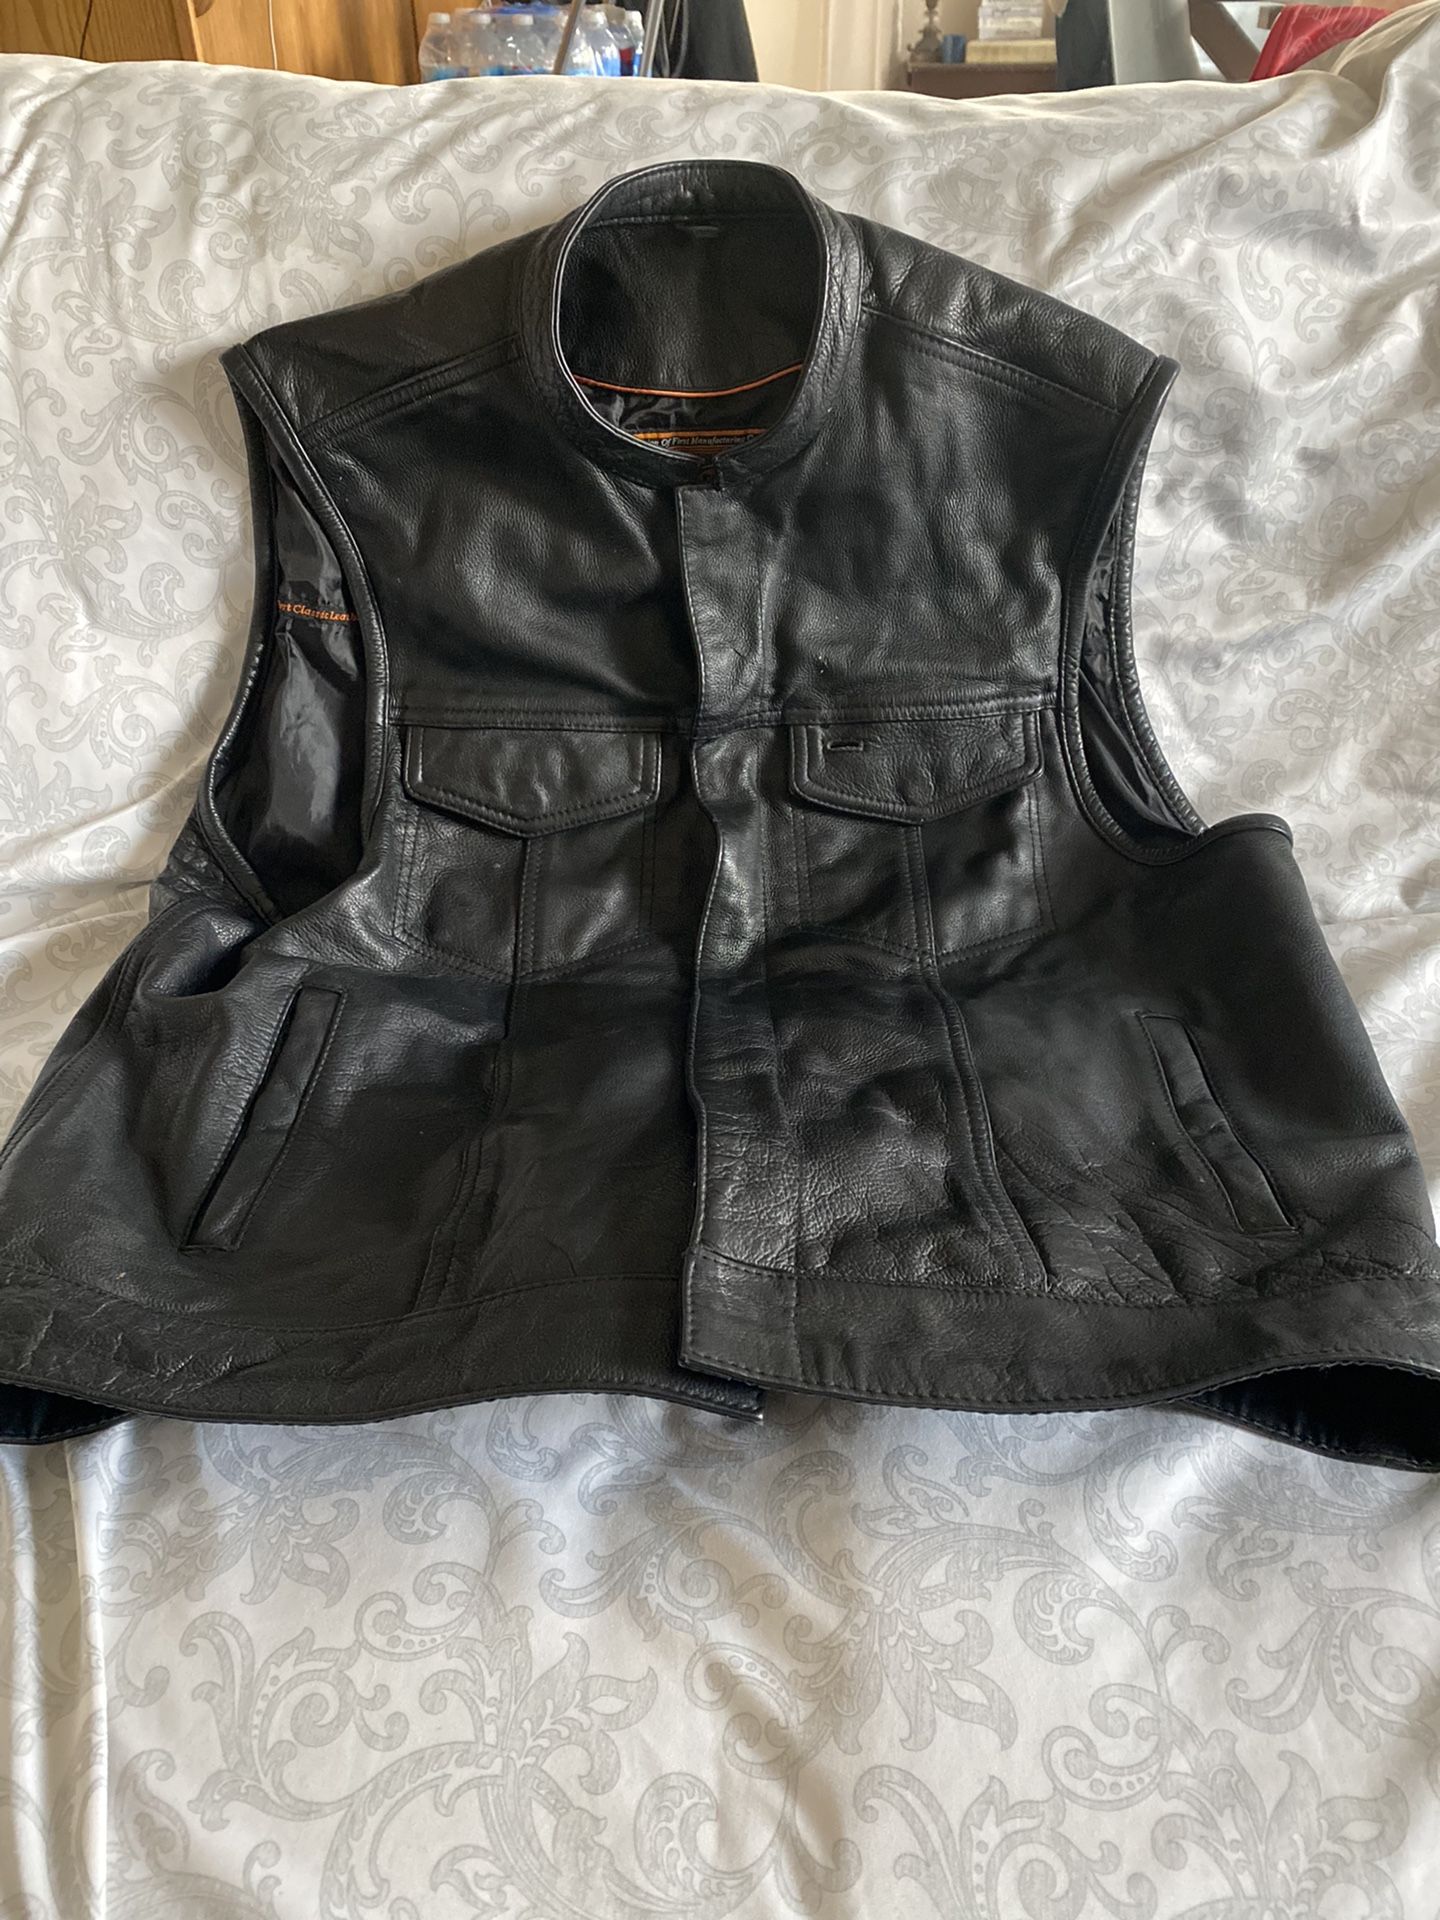 First Mfg. Leather Cut (vest) 3X